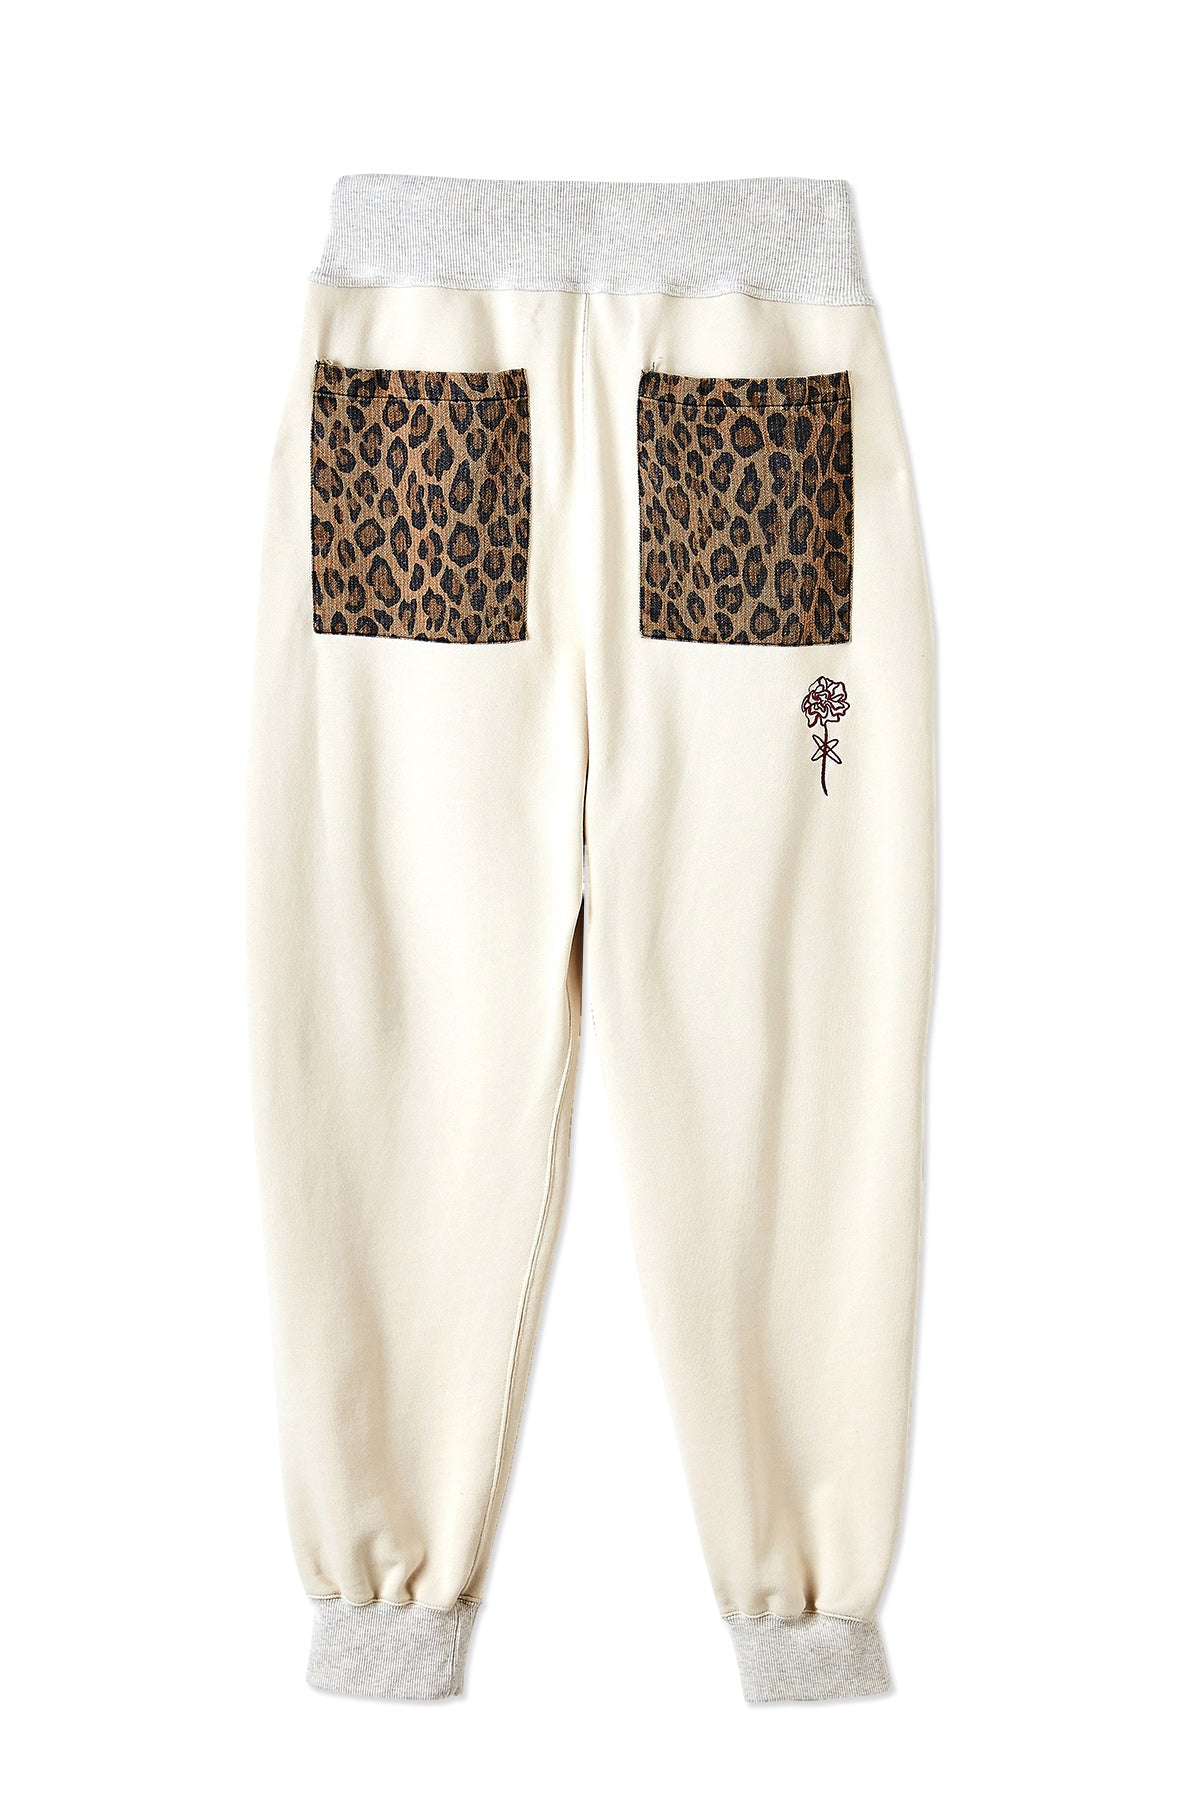 WITH LEOPARD PANTS